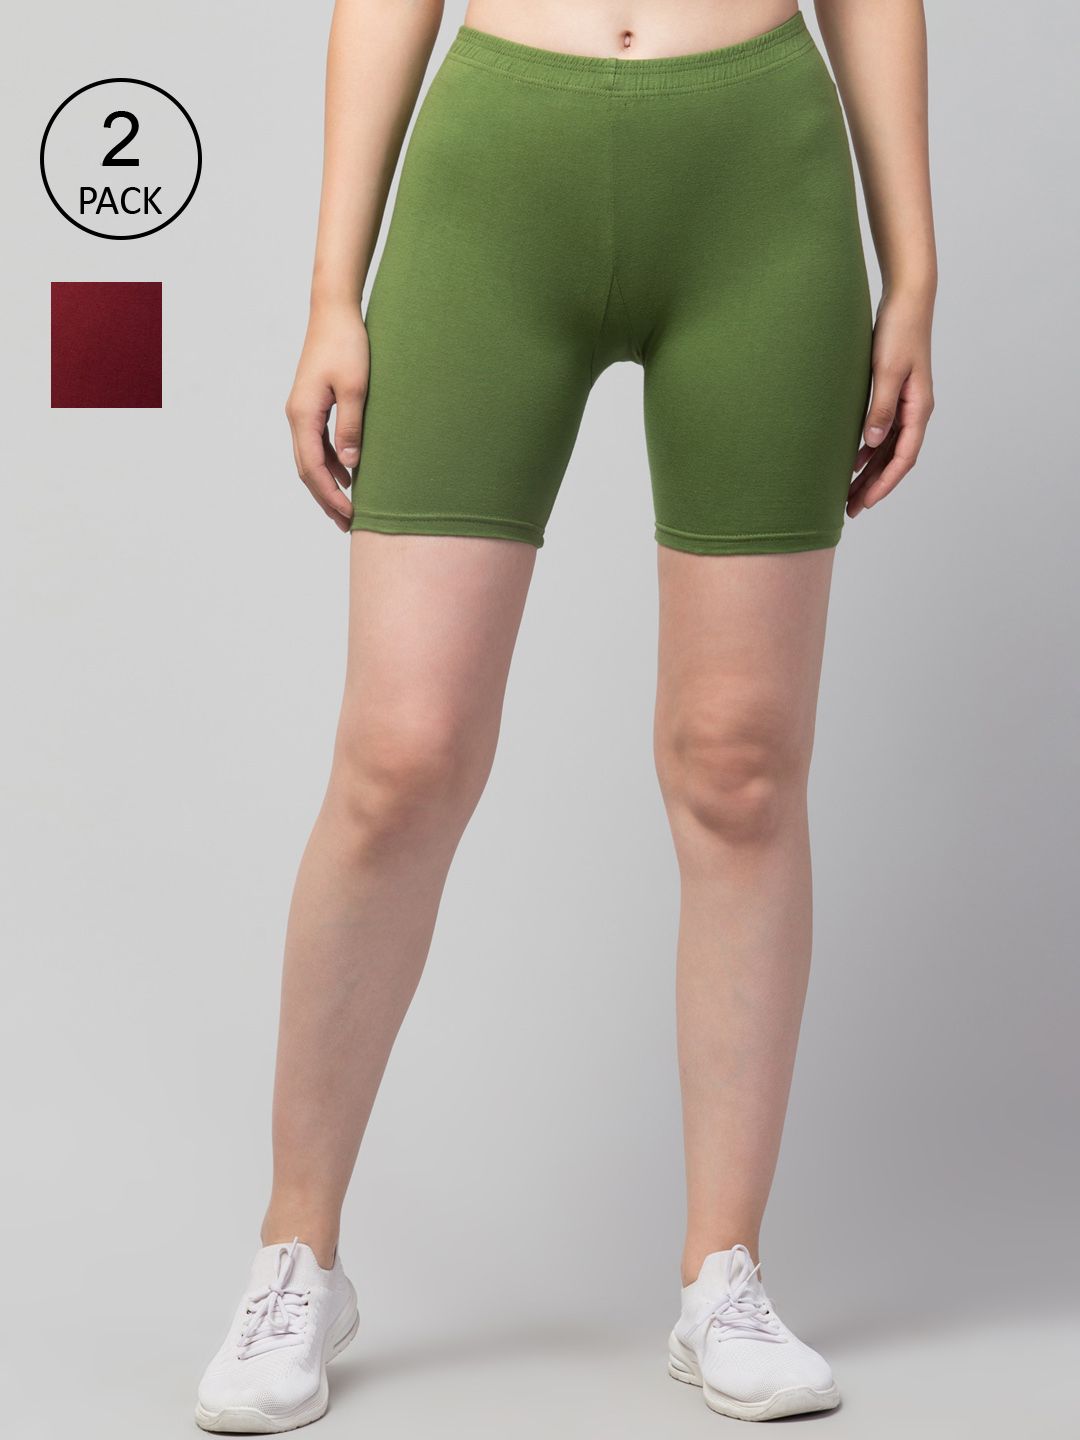 Apraa & Parma Women Pack of 2 Lime Green & Maroon Slim Fit Cycling Sports Shorts Price in India